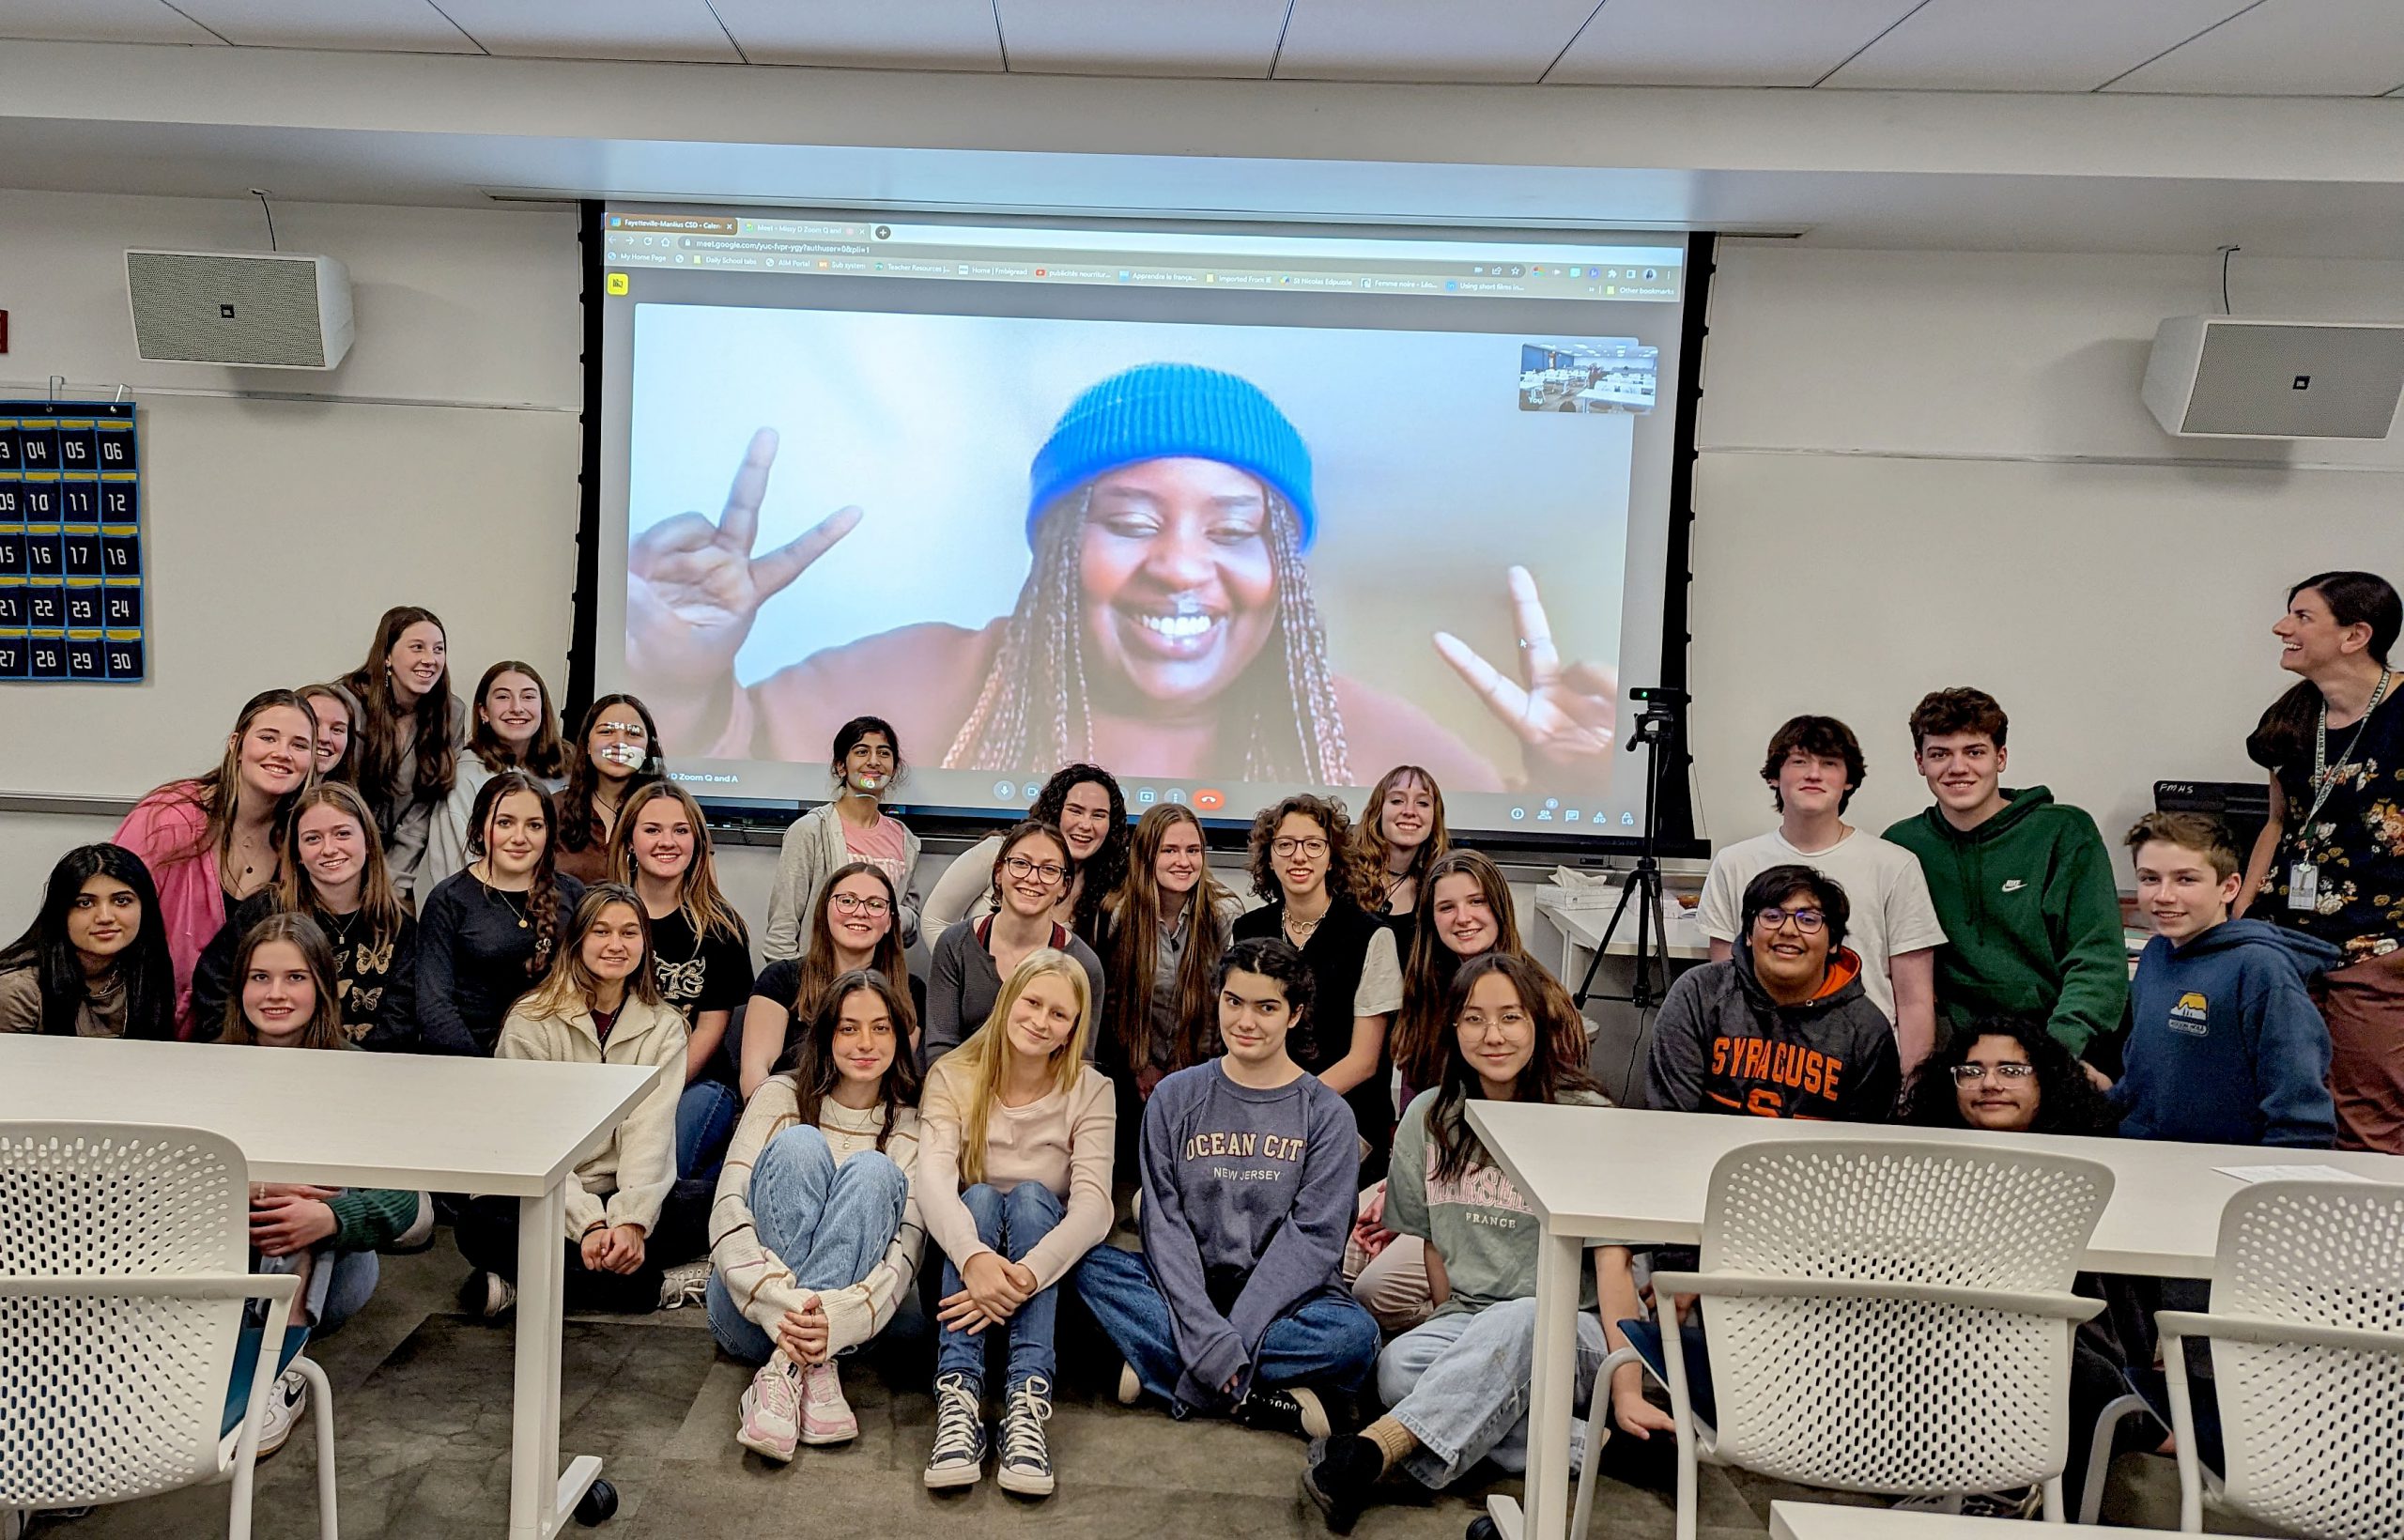 Hip hop artist Missy D is on a video screen behind a group of high school students